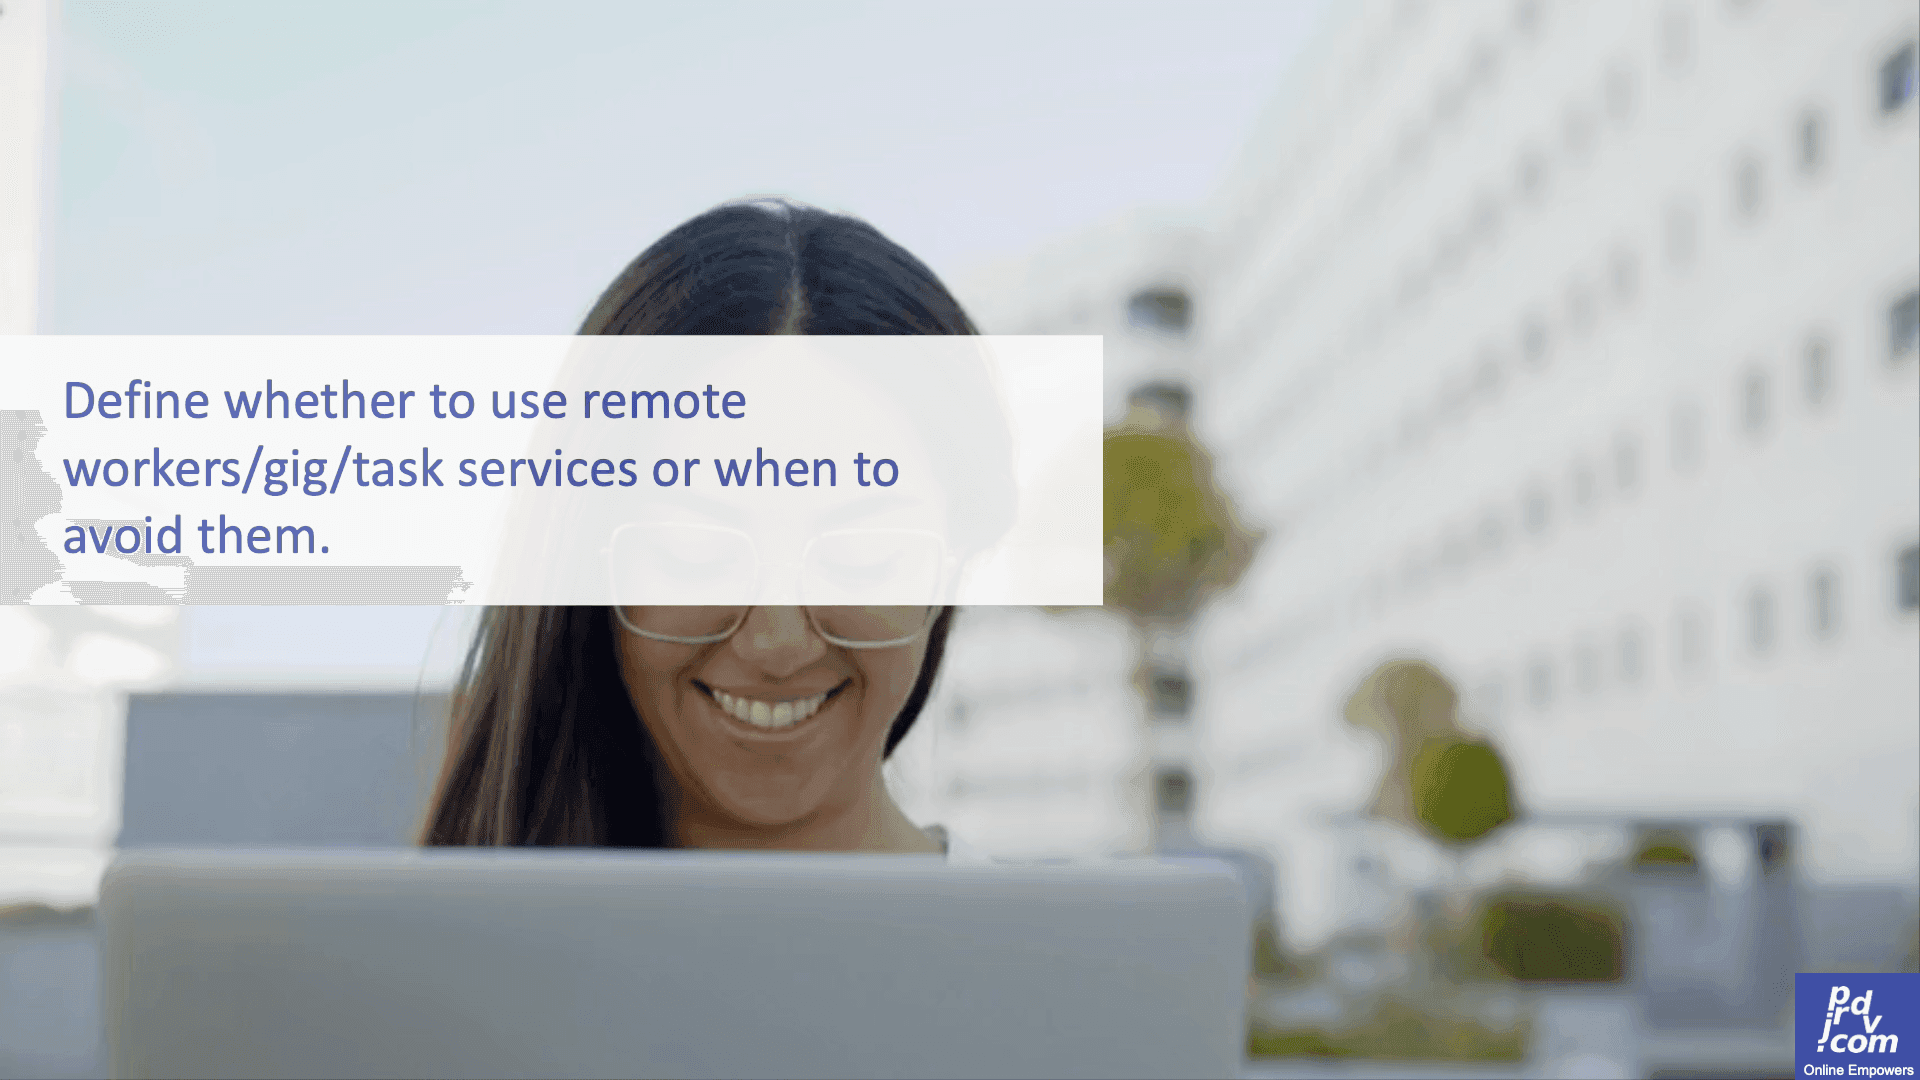 Define whether to use remote workers/gig/task services or when to avoid them.